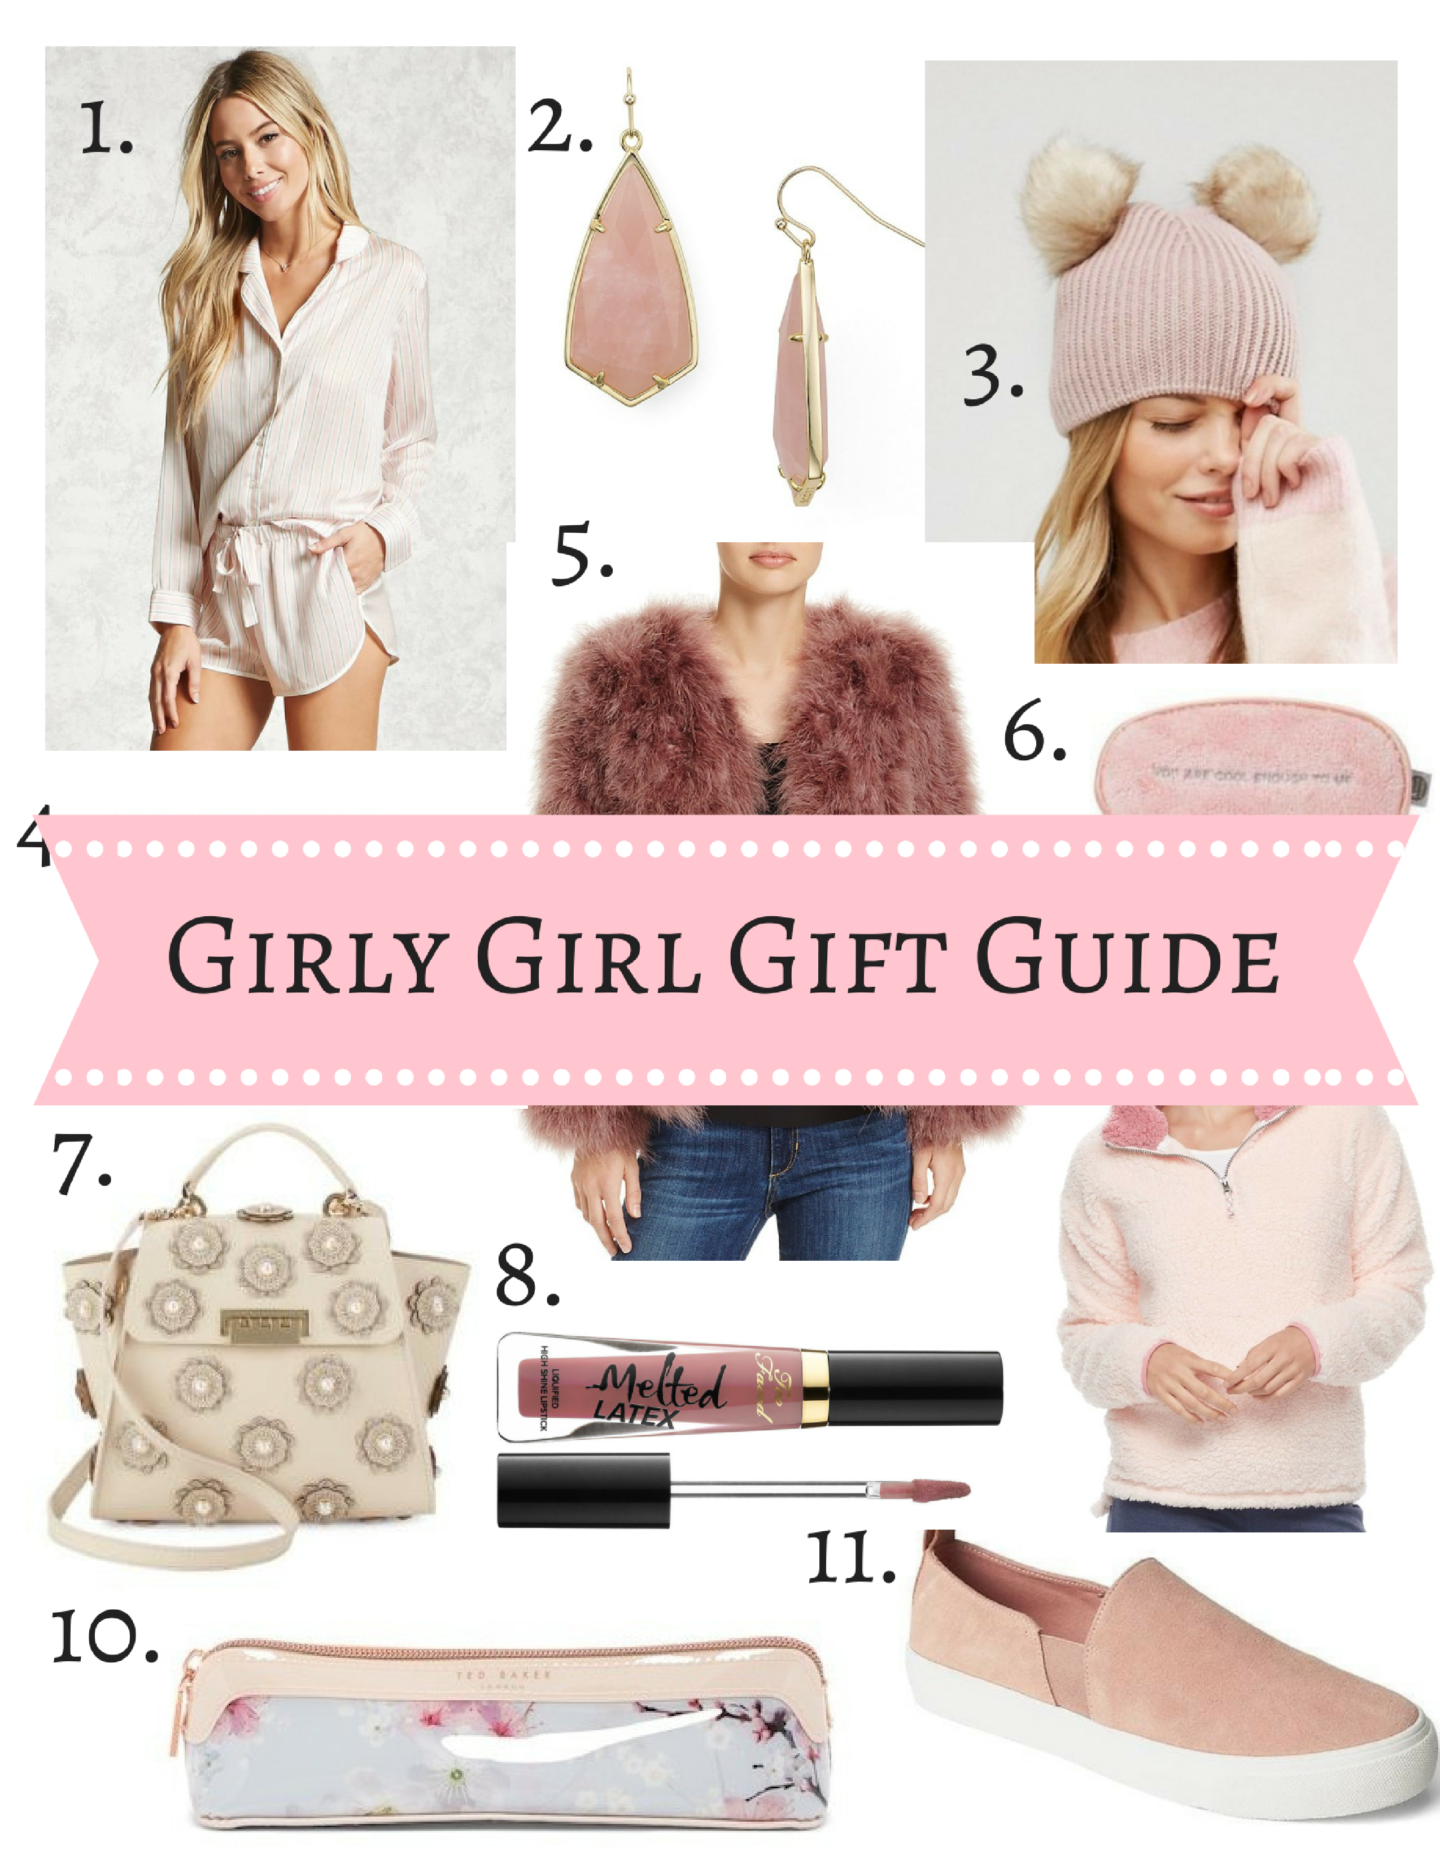 A GIFT GUIDE FOR THE PINK OBSESSED 